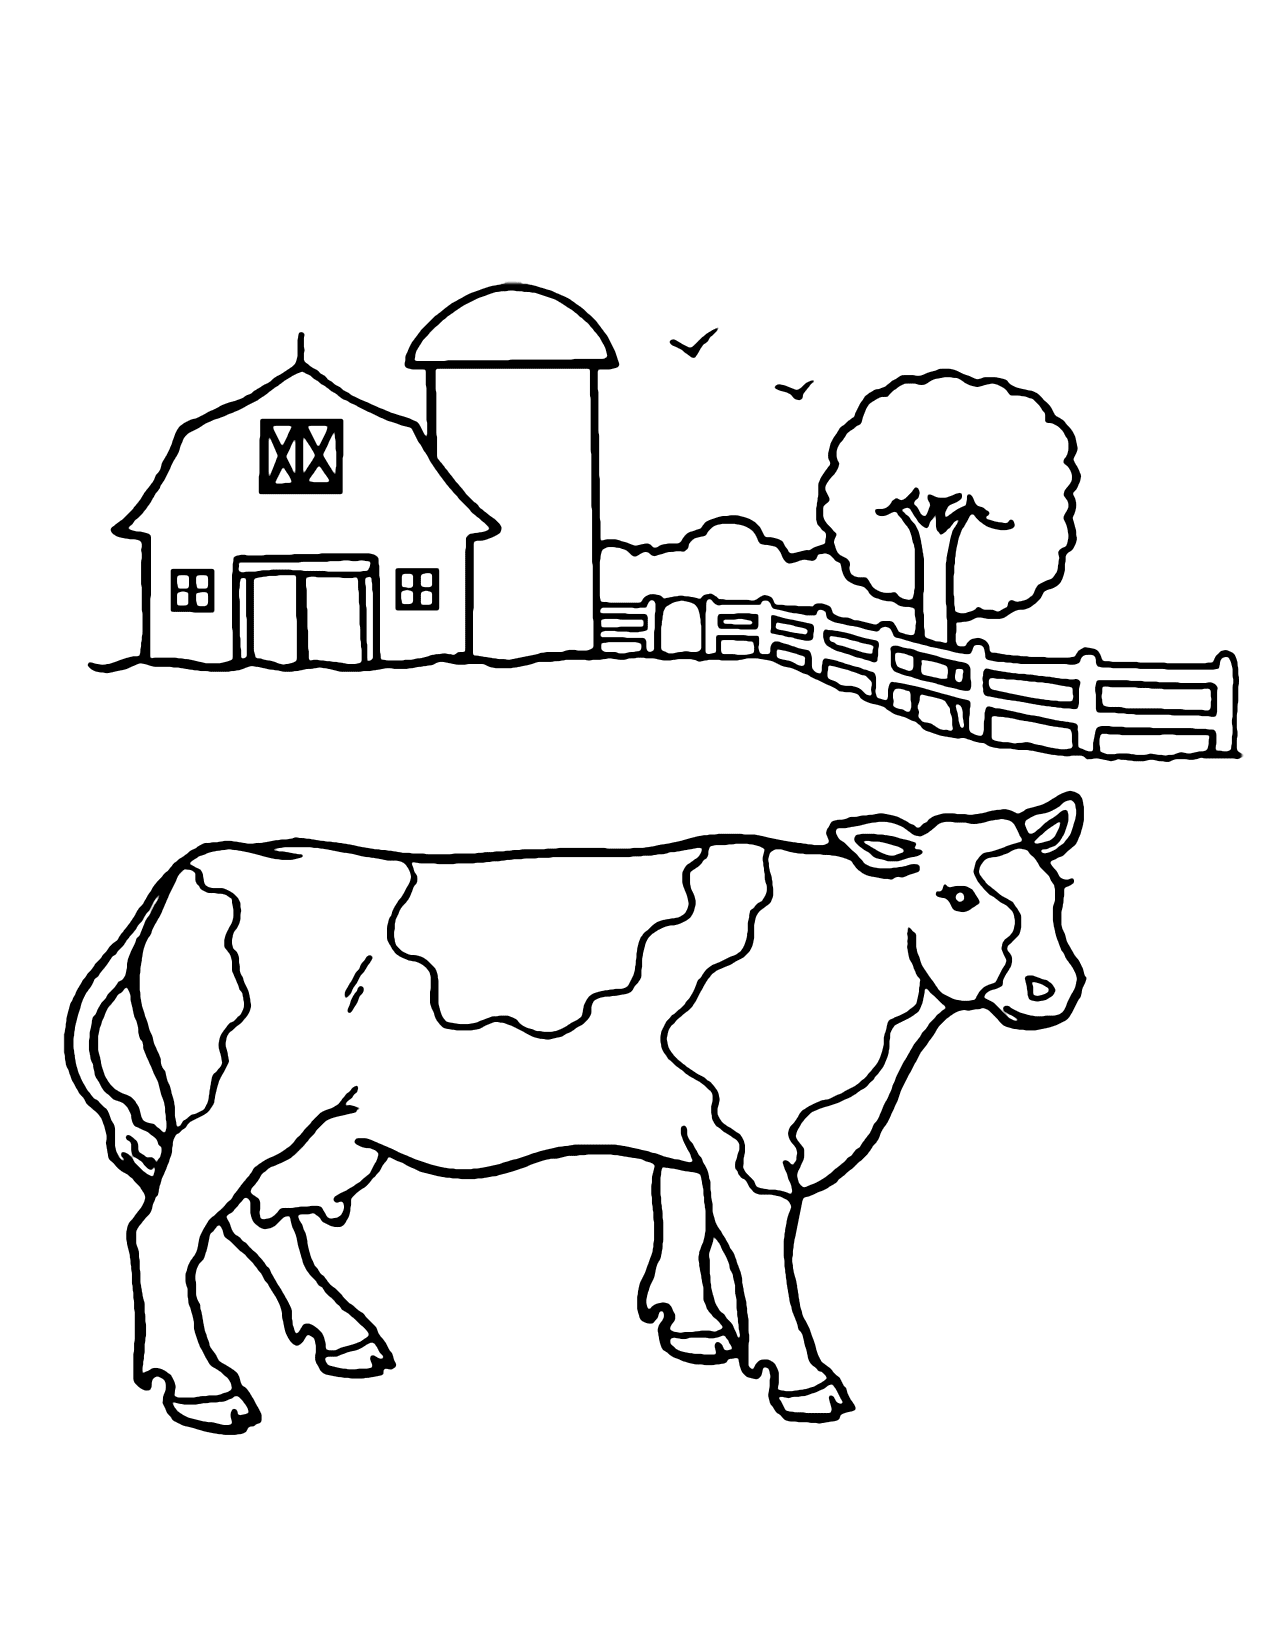 Cow On A Farm Coloring Page